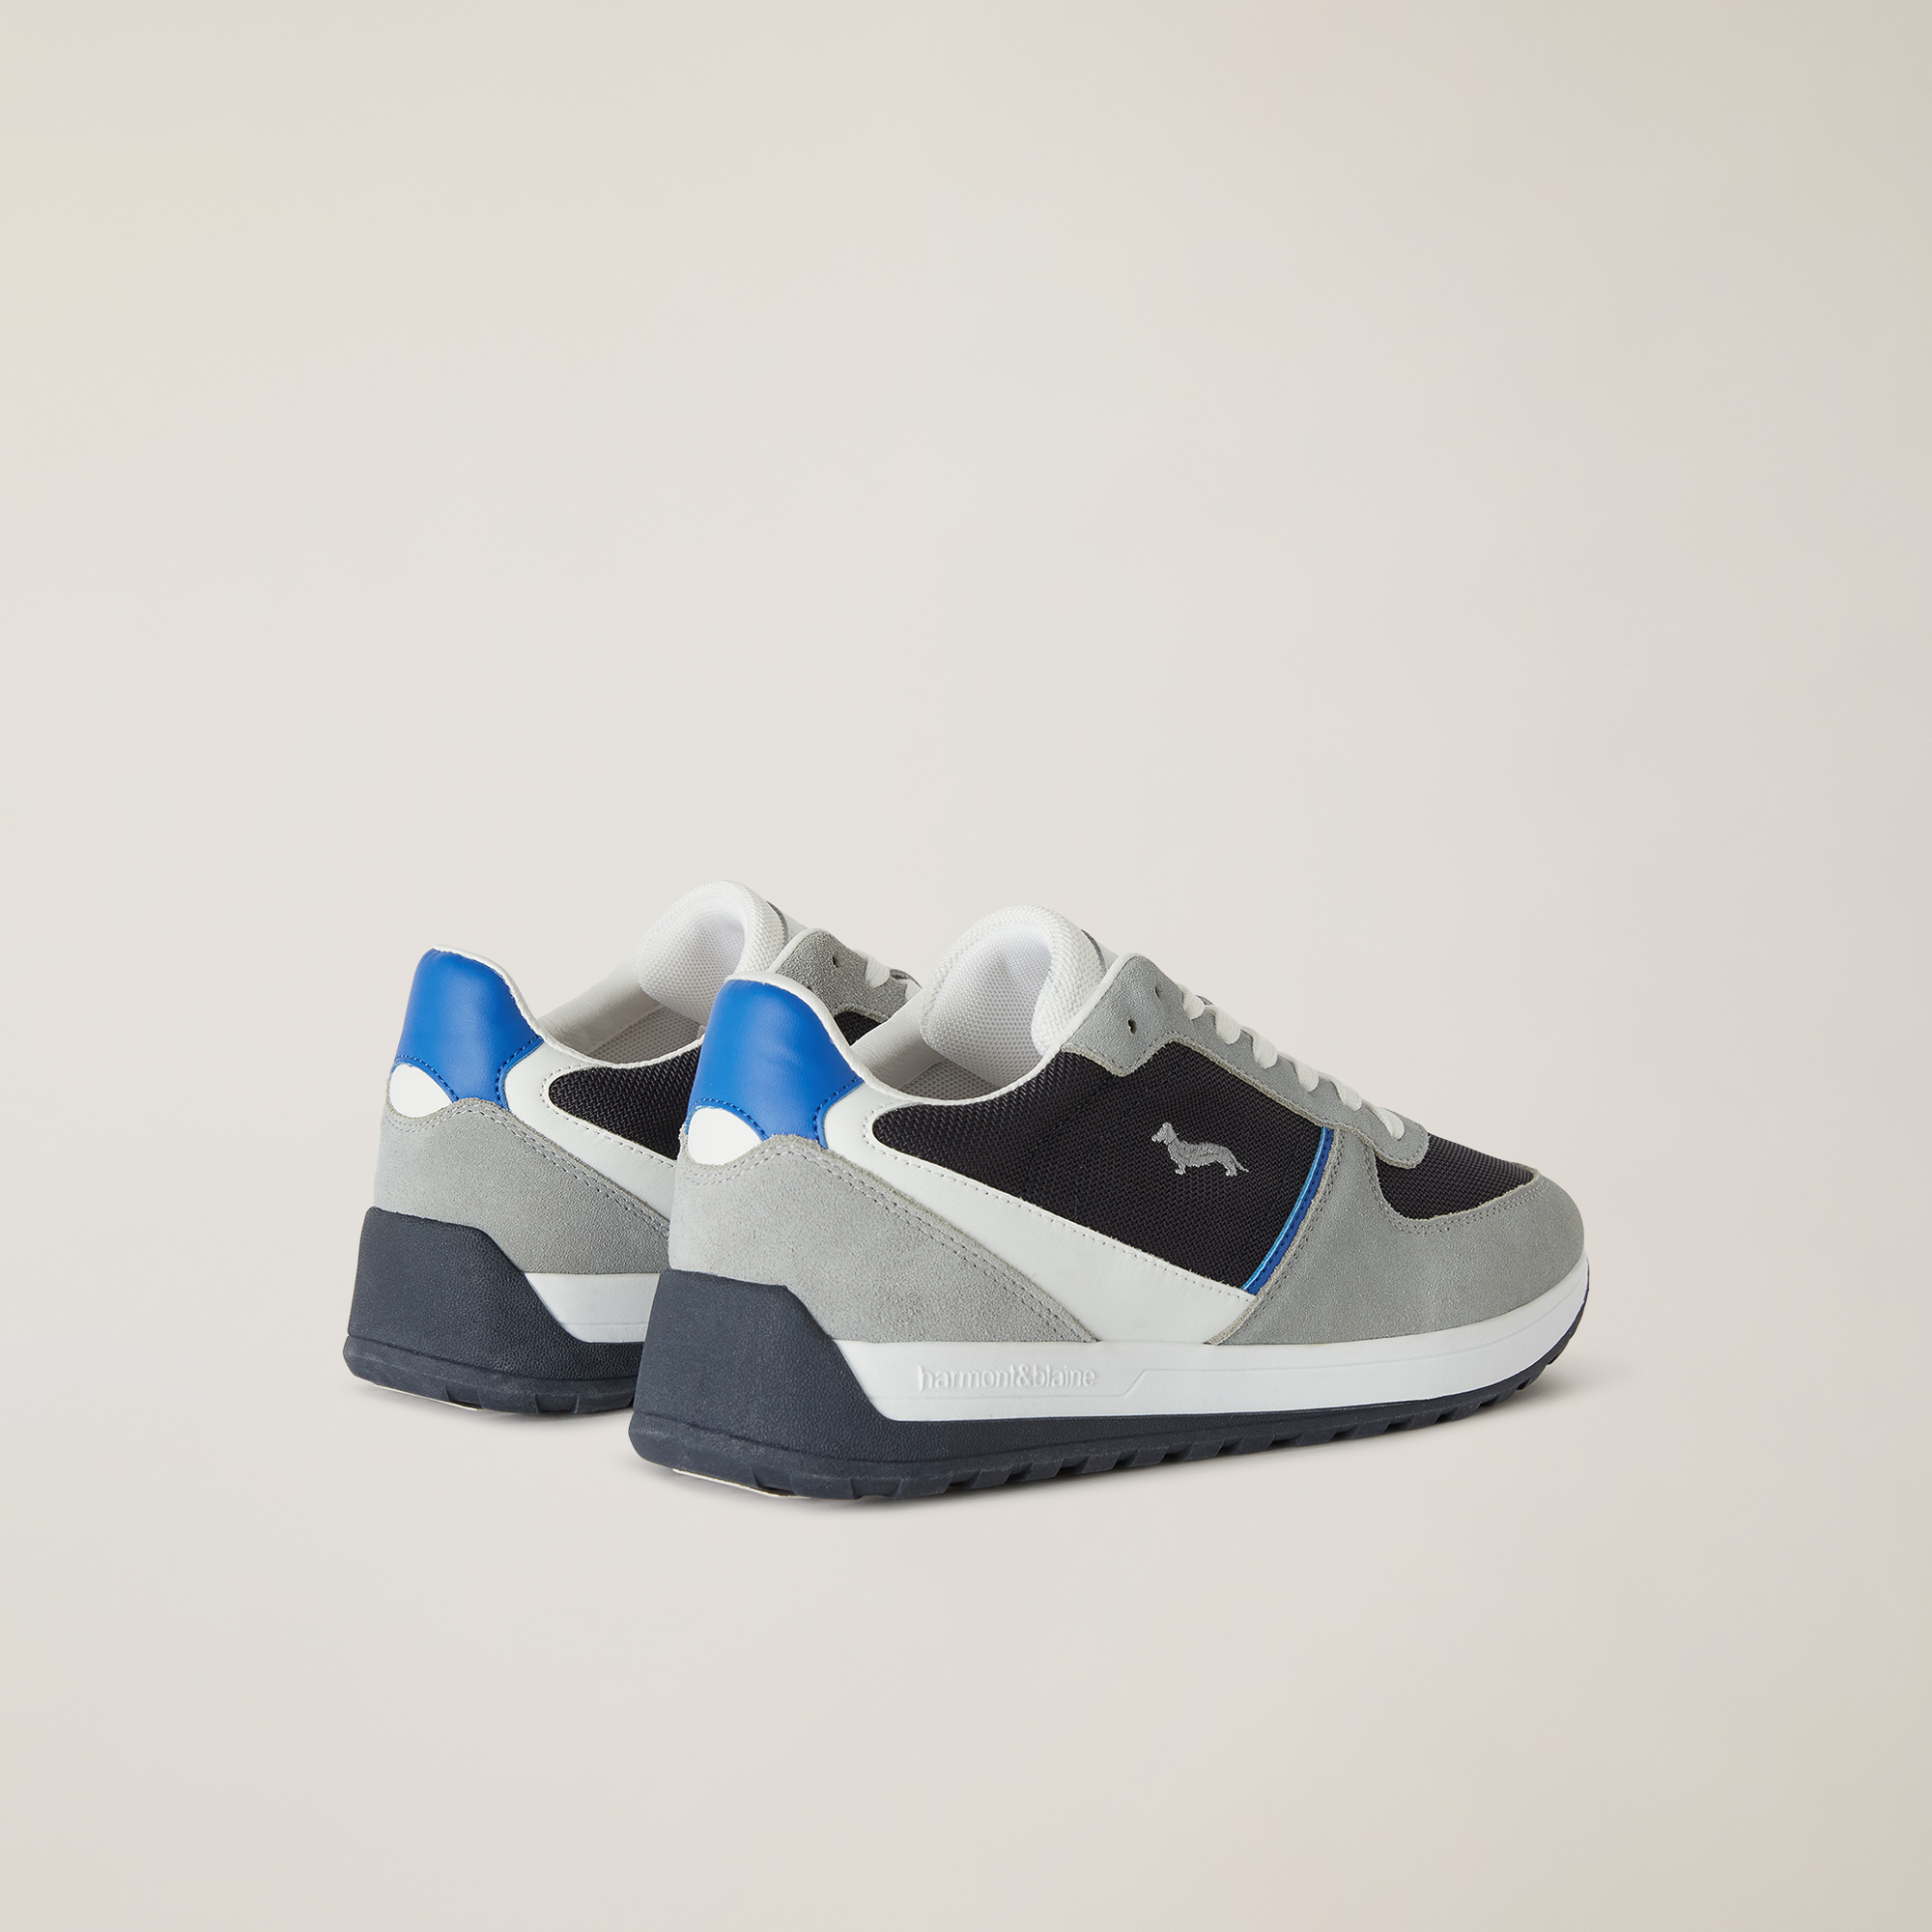 Sneaker with Two-Tone Sole, Gray/Blue, large image number 2